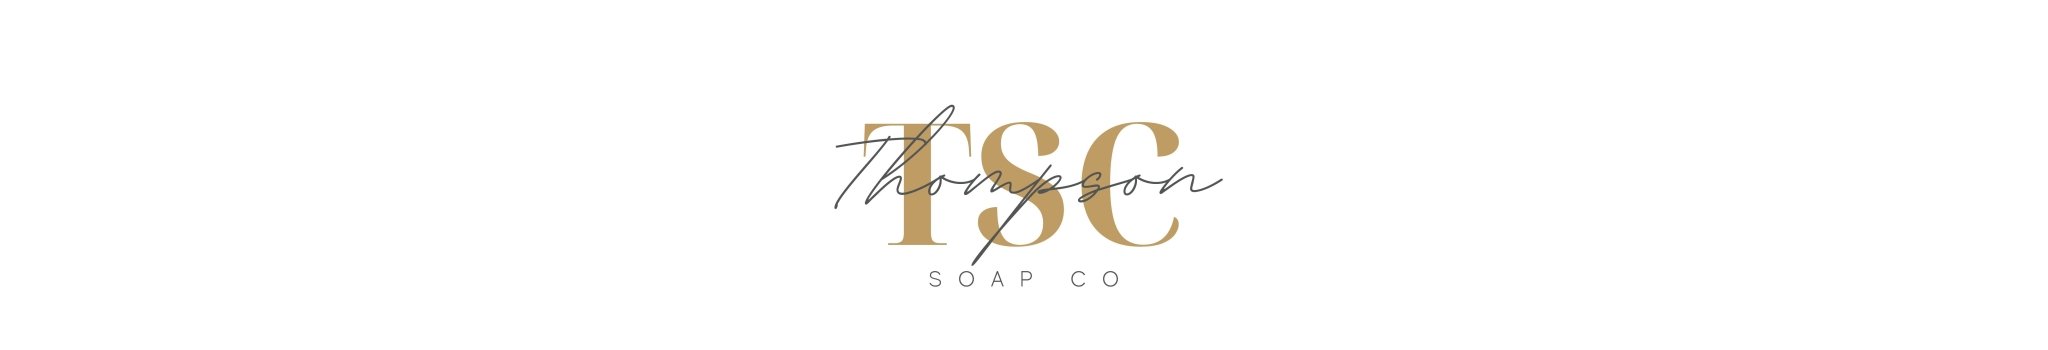 Thompson Soap Co | Pretty by Her